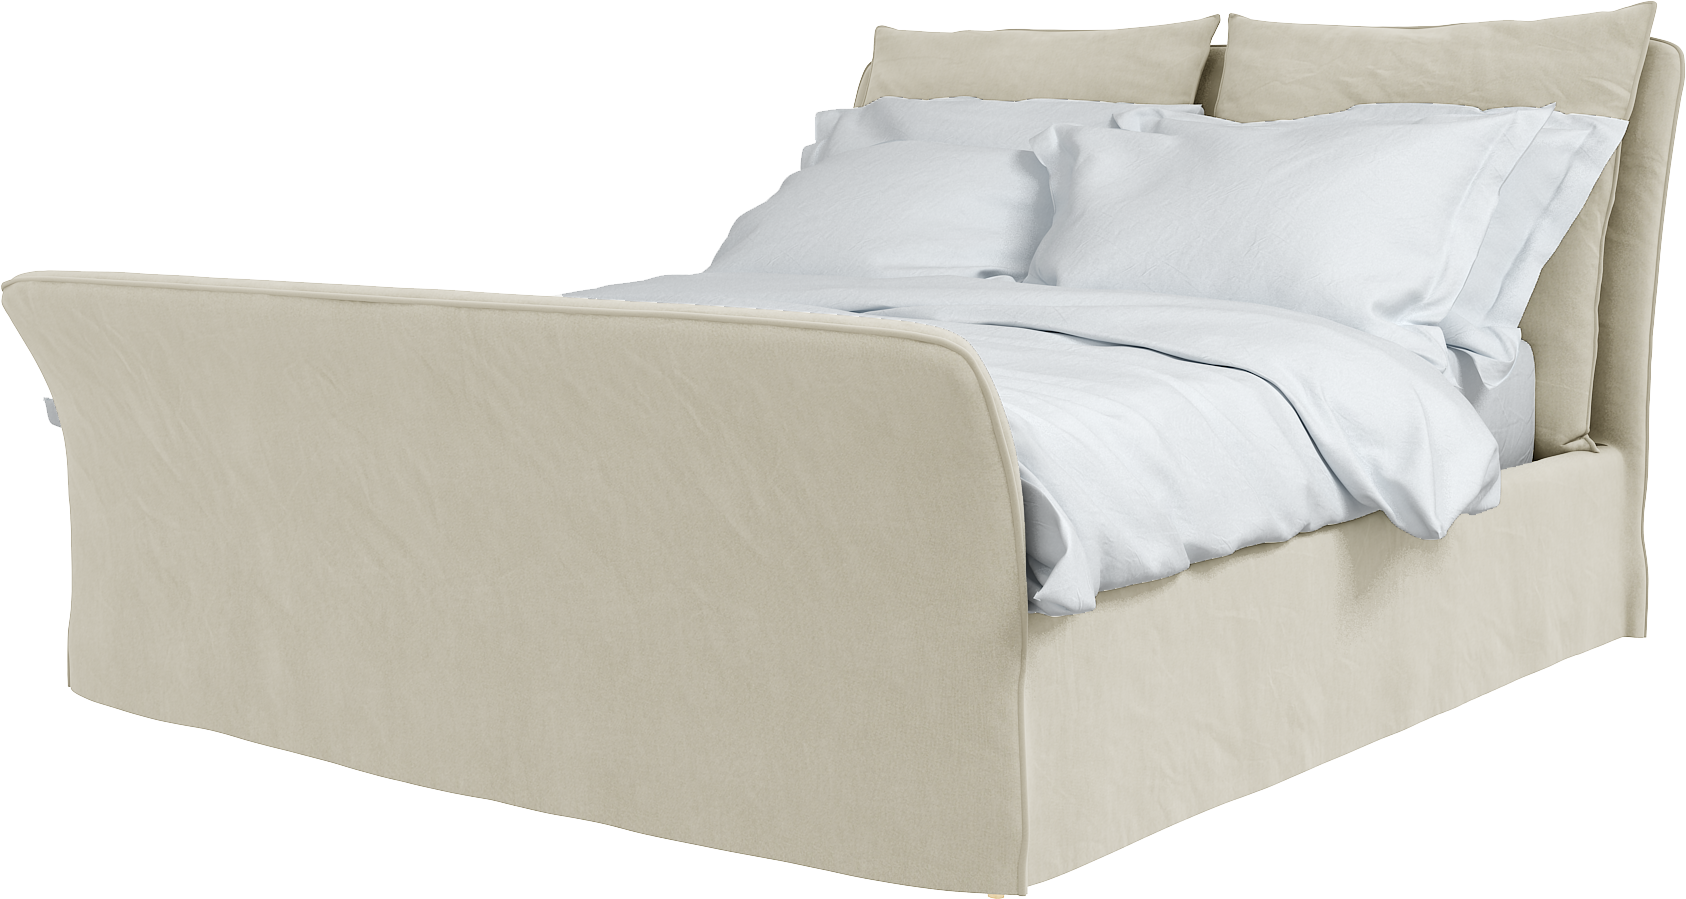 Maker and Son Super King Footer Bed, Marnie Piped Edge in Sunstone Natural Beige